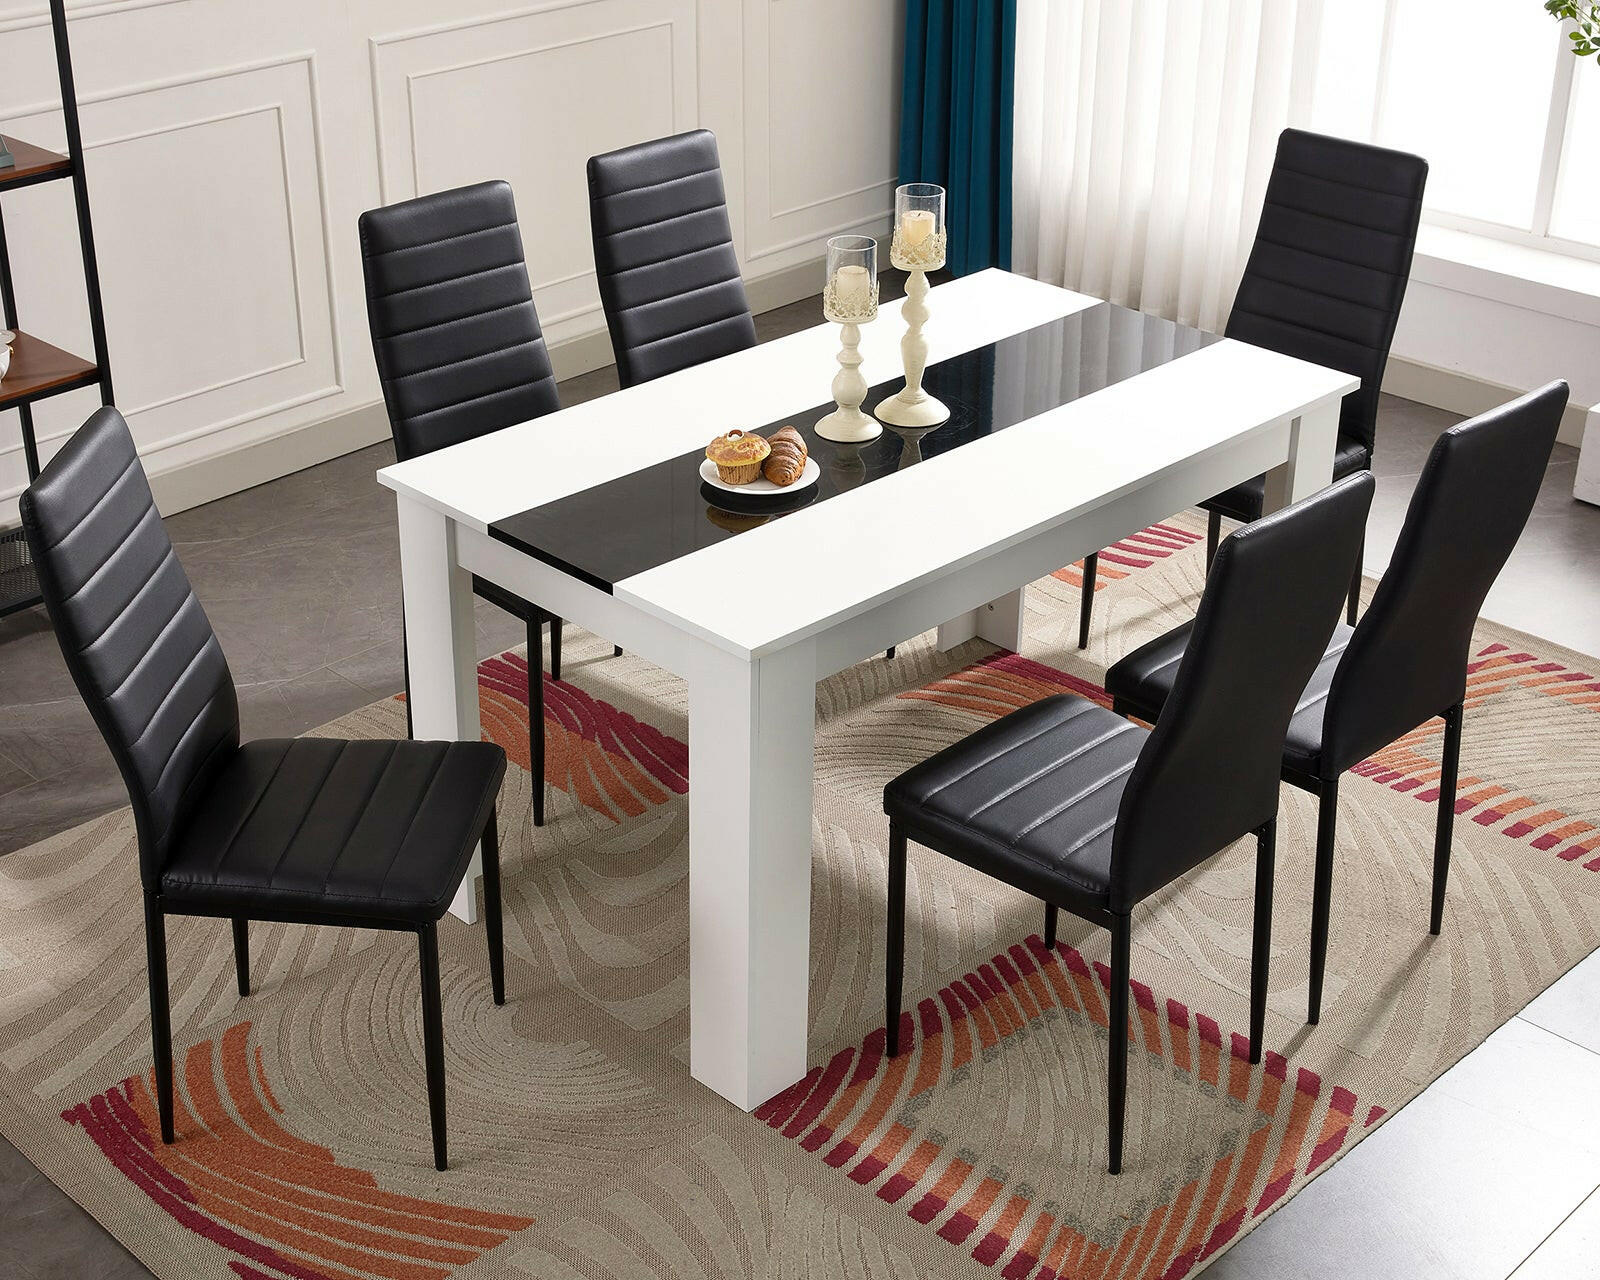 Dining Table and 6 Chairs